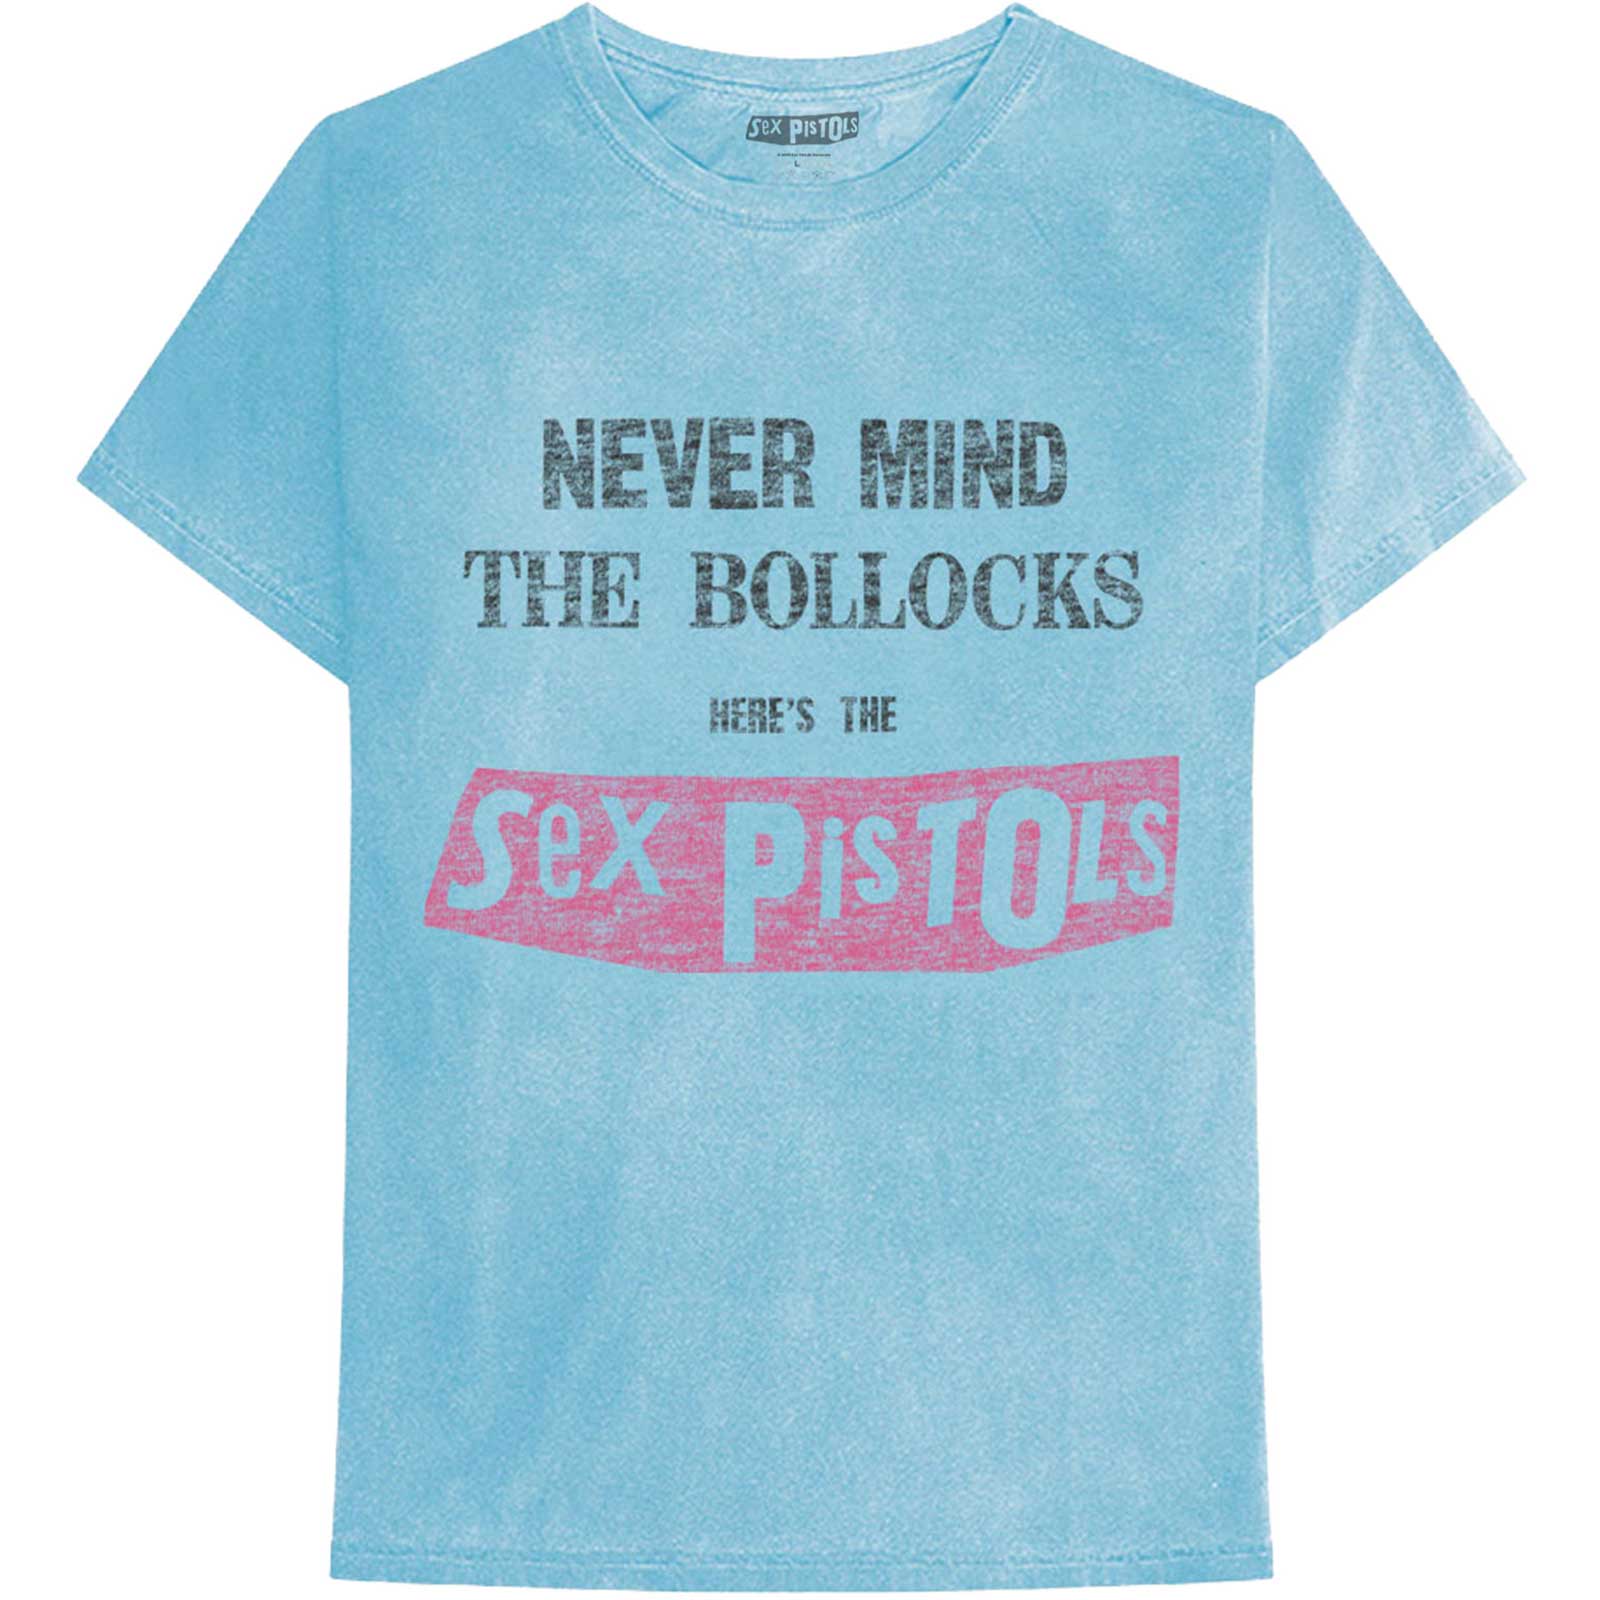 The Sex Pistols Unisex T-Shirt: Never Mind the Bollocks Distressed (Wash Collection)